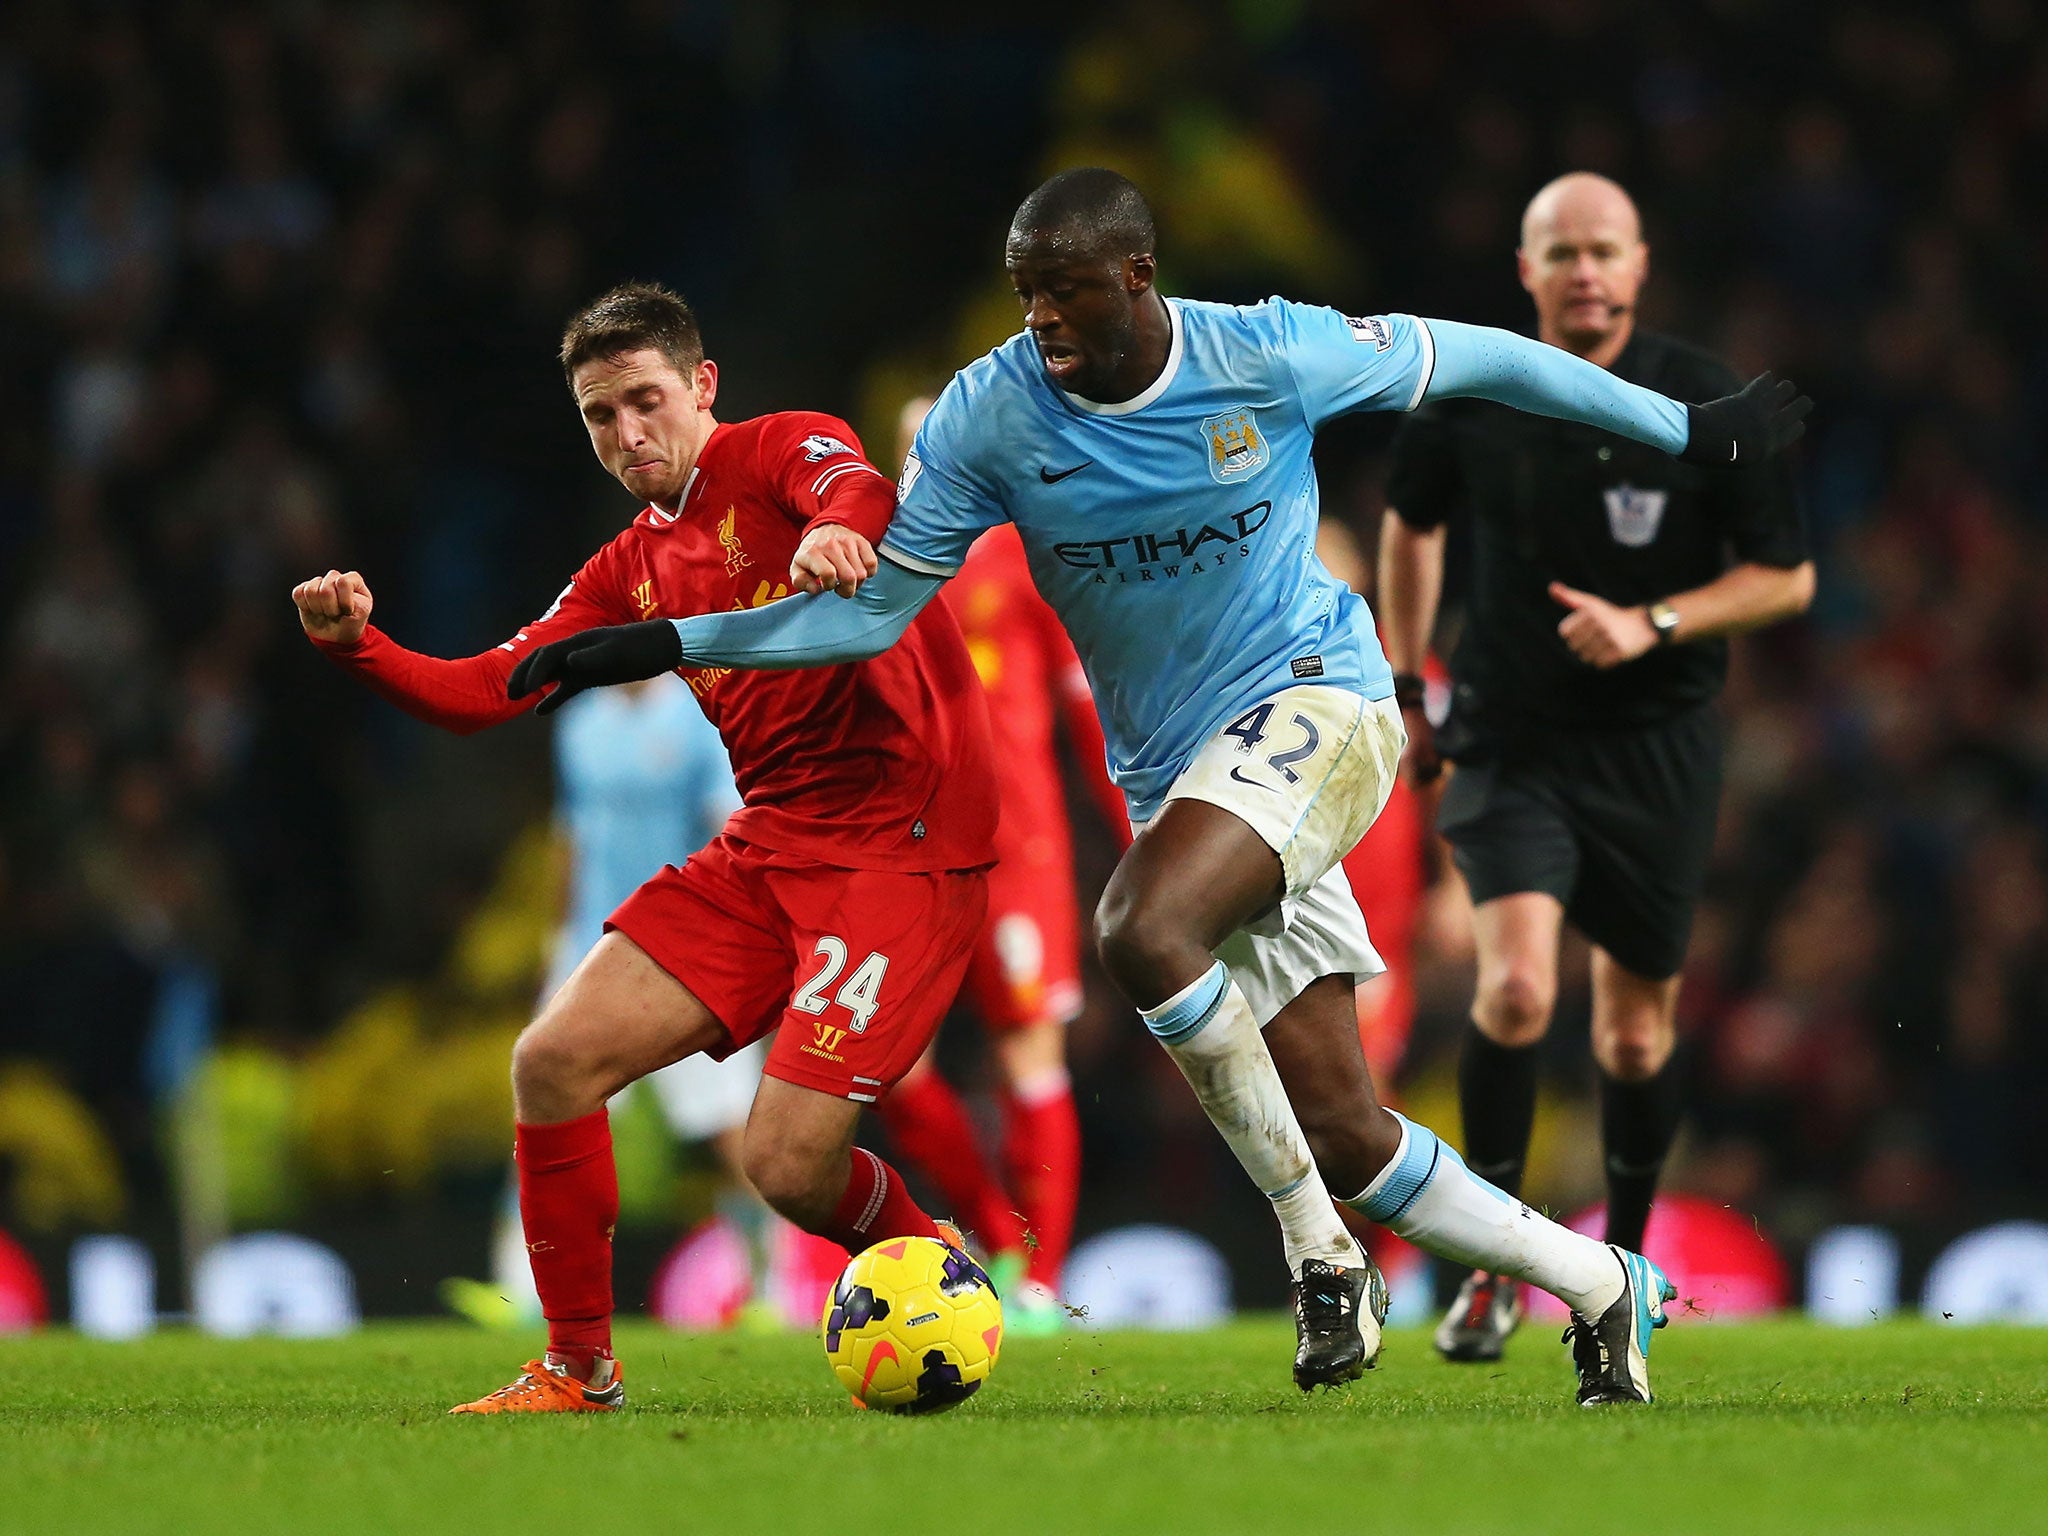 Yaya Toure of Manchester City is closed down by Joe Allen of Liverpool during the match between Manchester City and Liverpool at Etihad Stadium on December 26, 2013 in Manchester, England.